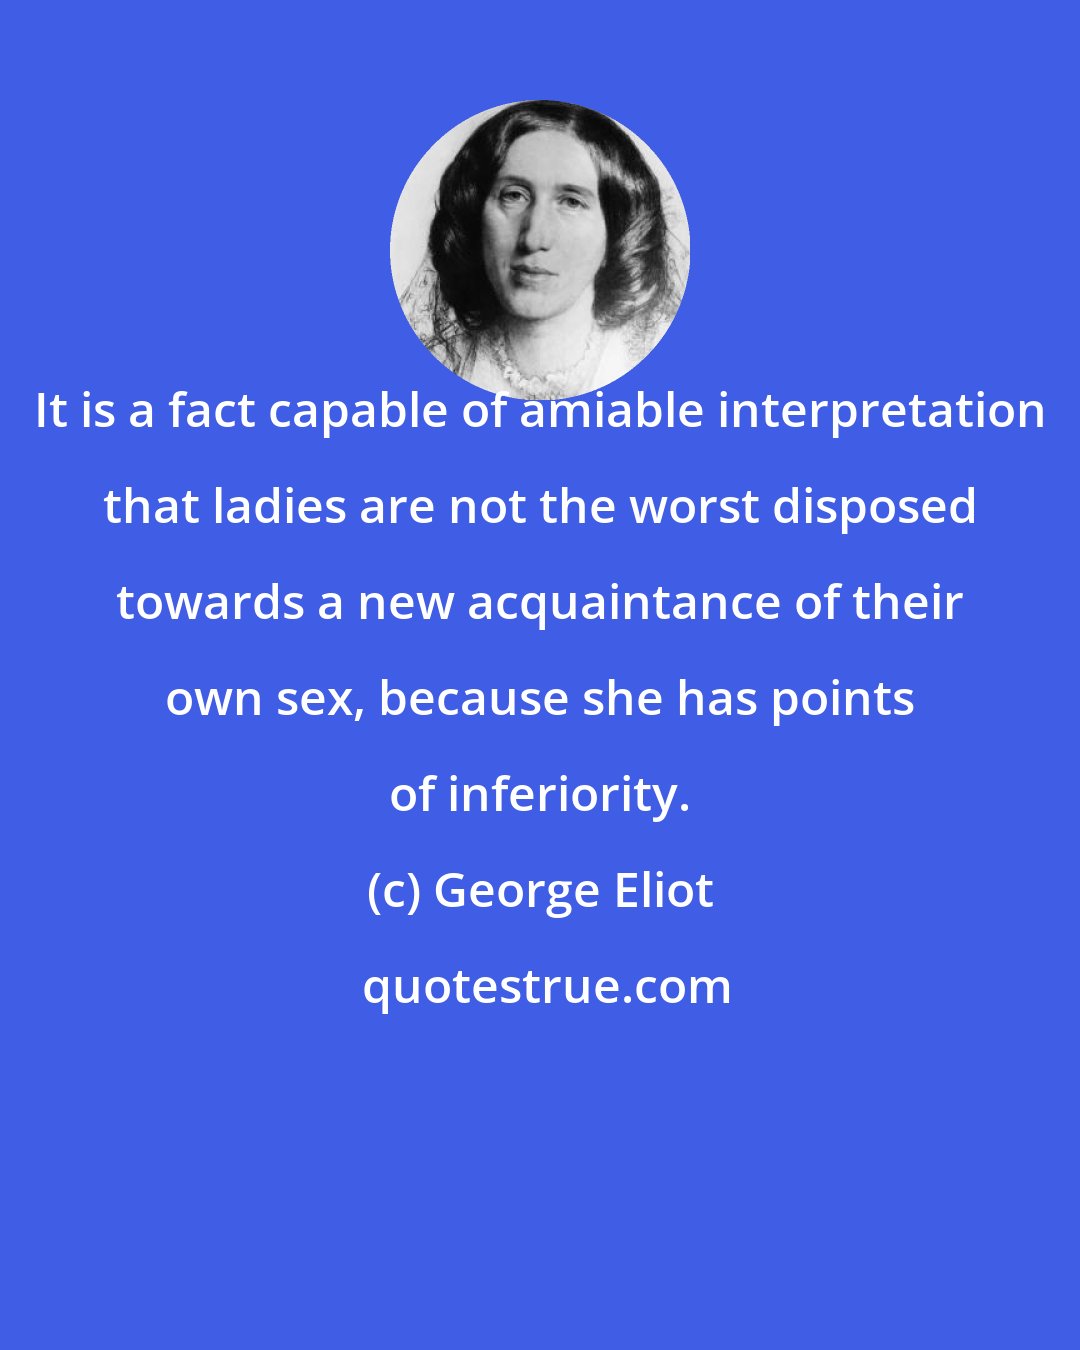 George Eliot: It is a fact capable of amiable interpretation that ladies are not the worst disposed towards a new acquaintance of their own sex, because she has points of inferiority.